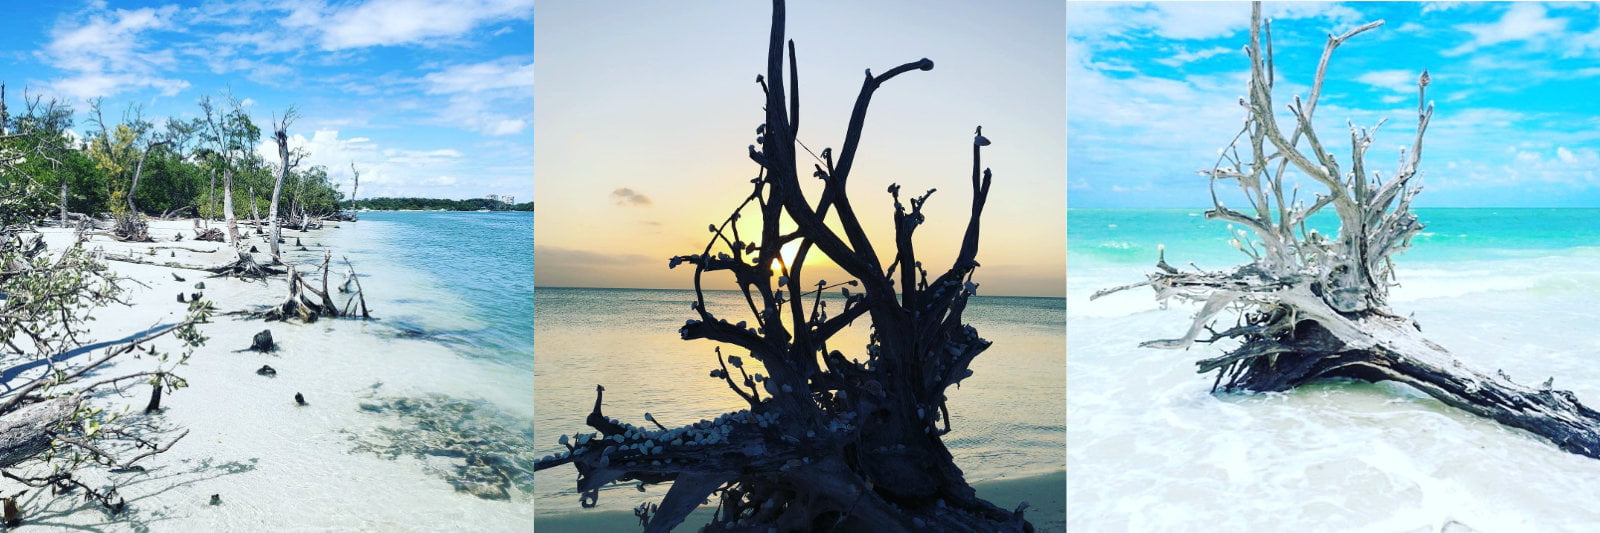 Delight in the Eerily Beautiful Driftwood of Lovers Key